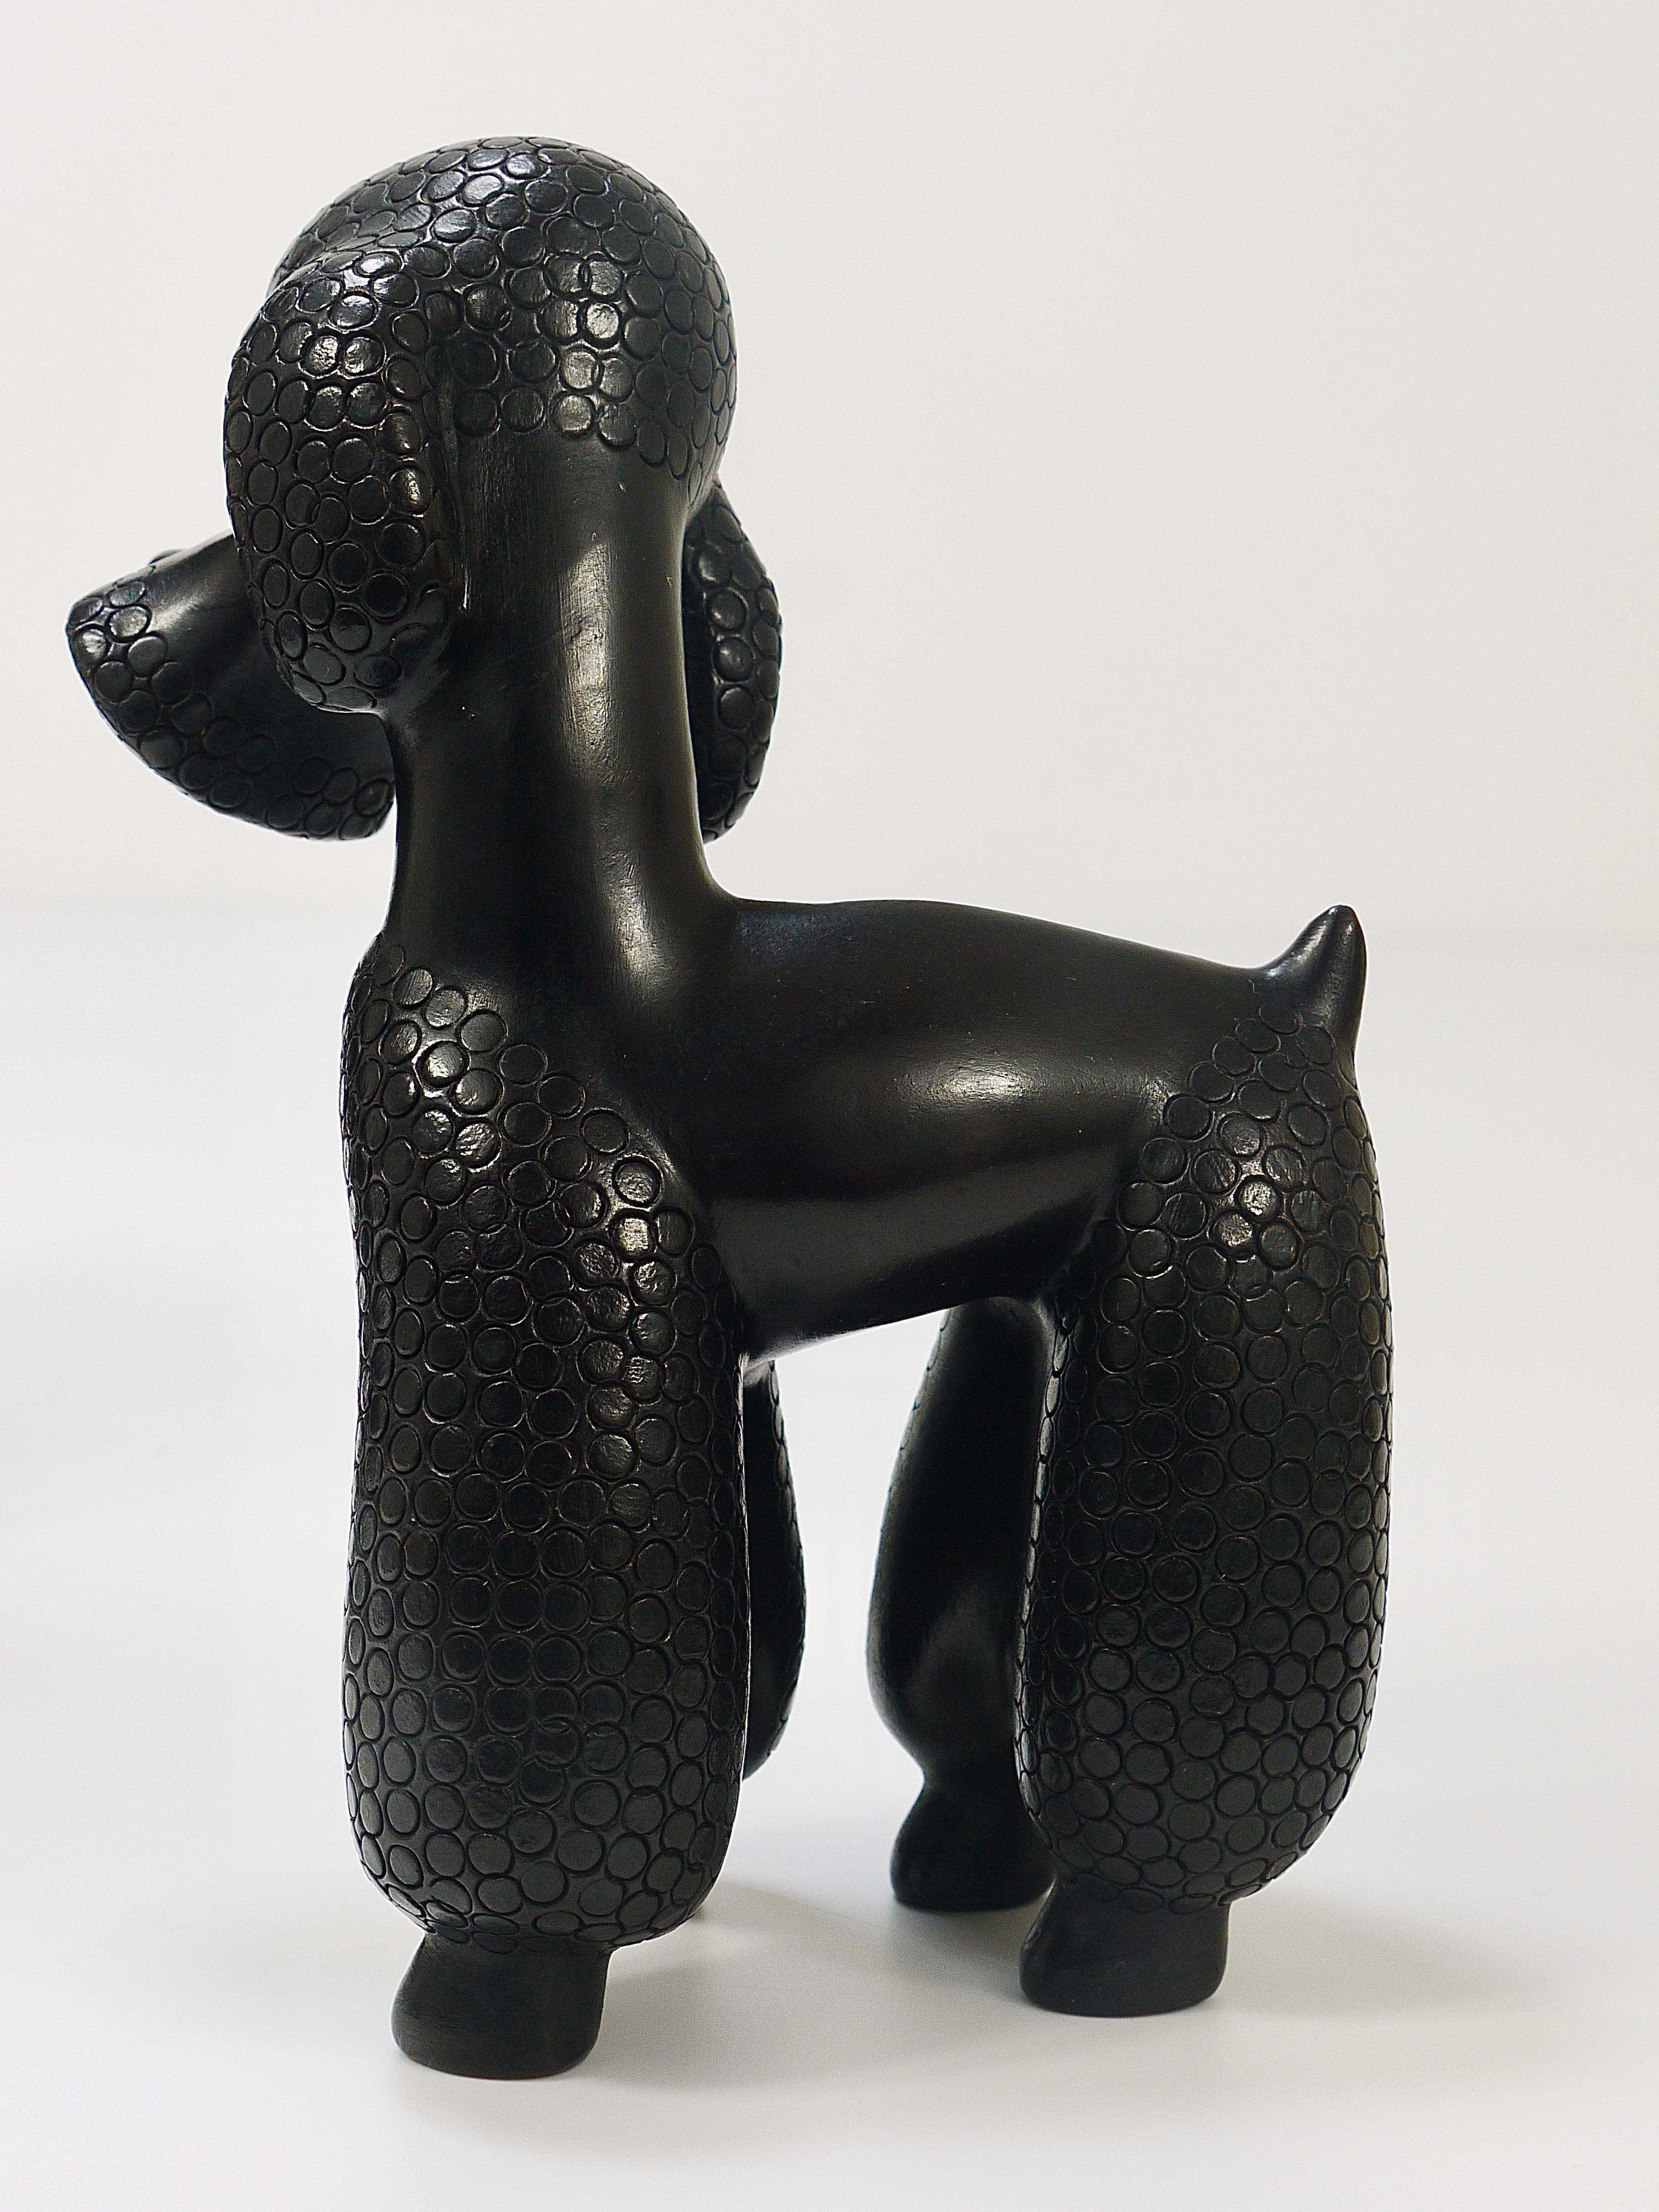 Pair of Mid-Century Dog Poodle Sculptures by Leopold Anzengruber, Austria, 1950s For Sale 11